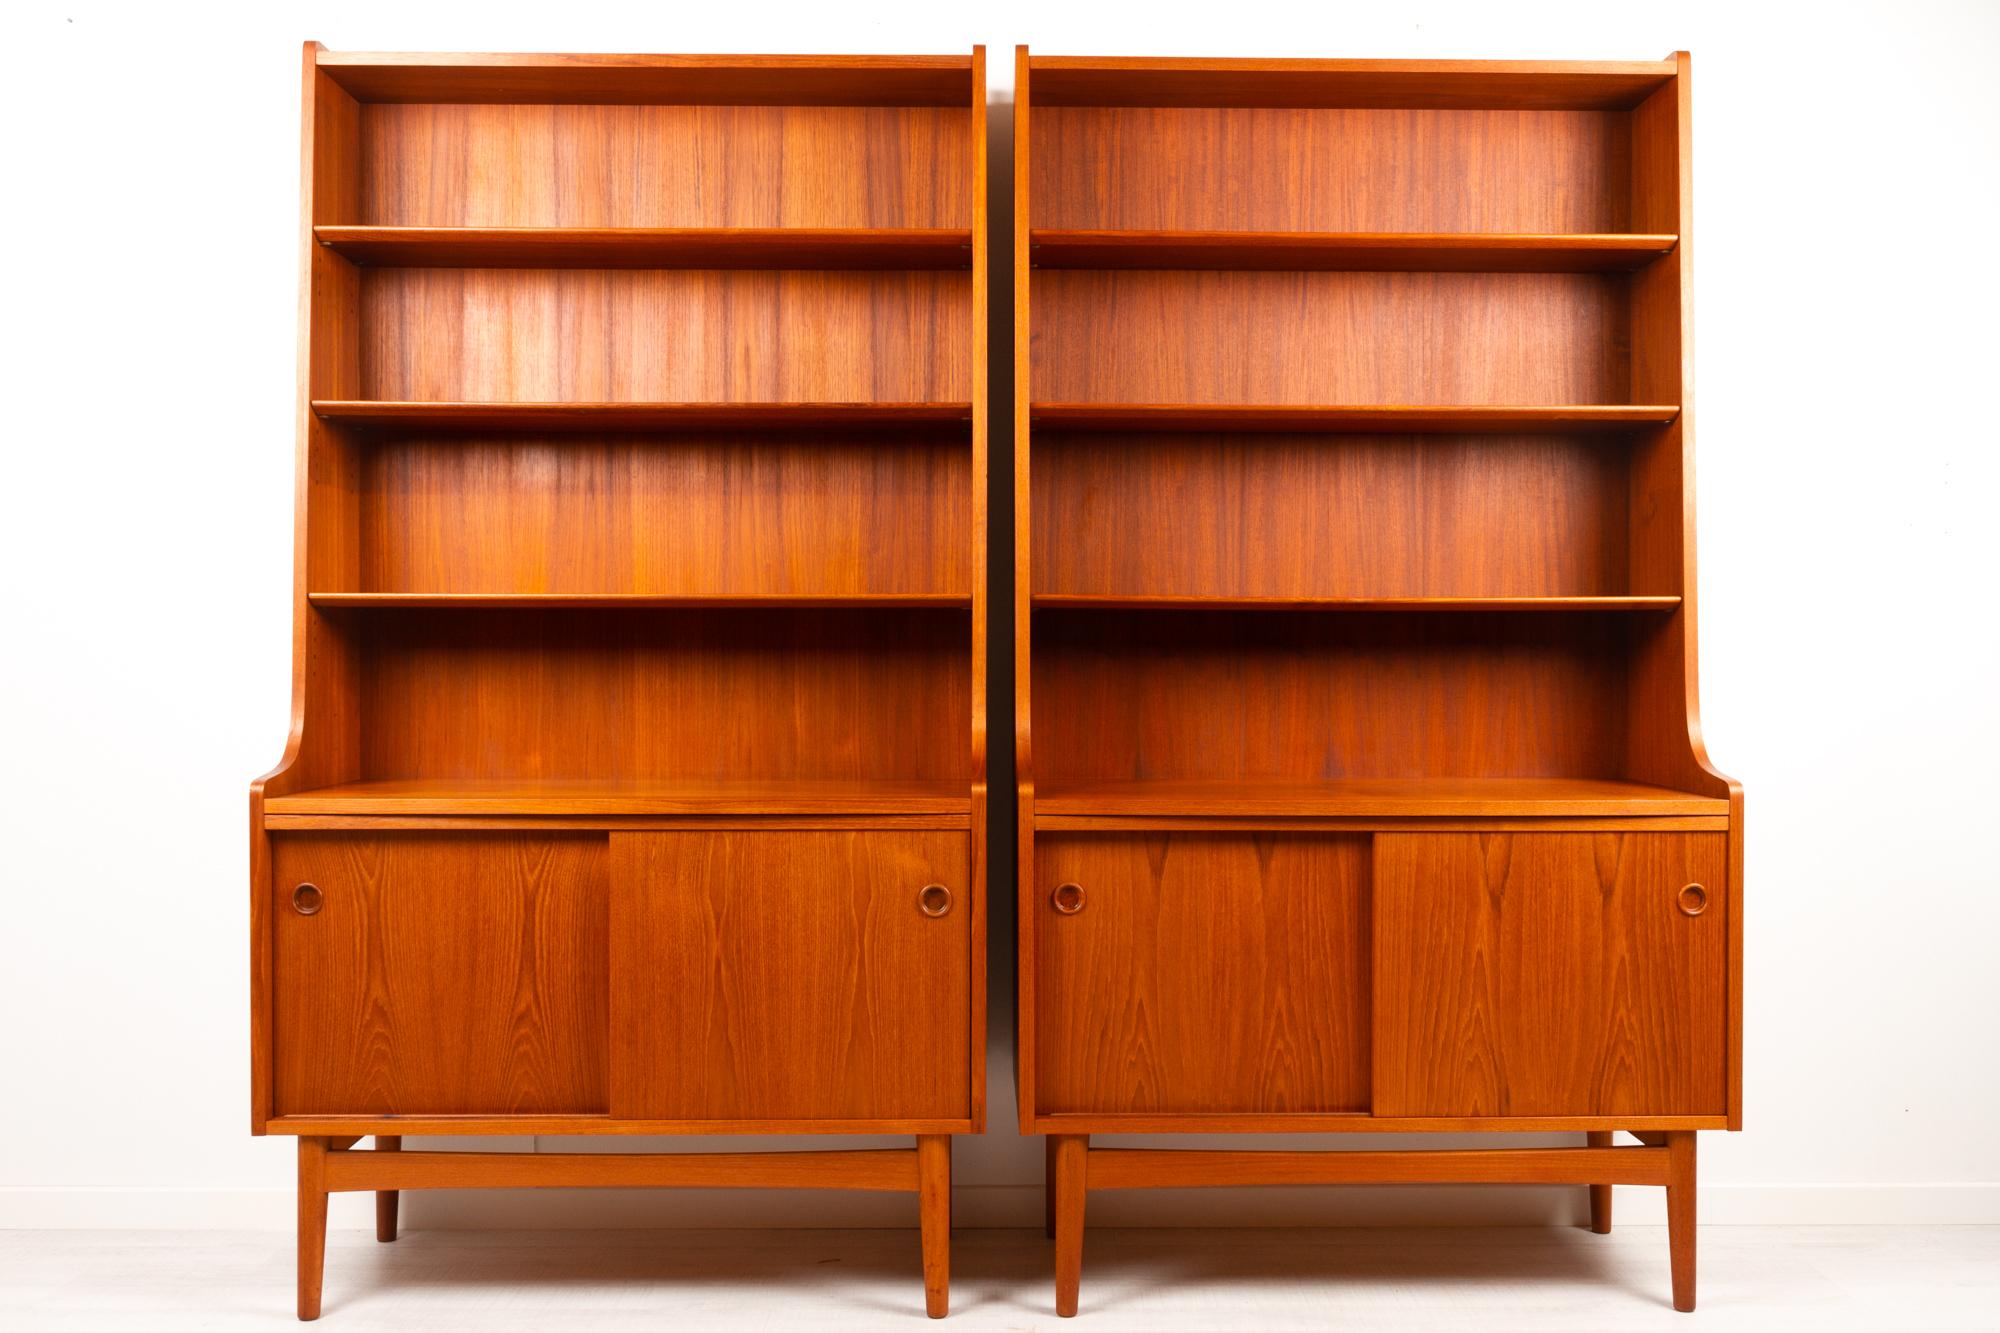 Pair of Danish modern teak bookcase by Johannes Sorth, 1960s
This Classic Scandinavian bookcase was designed by Danish master carpenter Johannes Sorth for Nexø Møbelfabrik, Bornholm in 1956. The idea was to combine a cabinet and a book case, and it